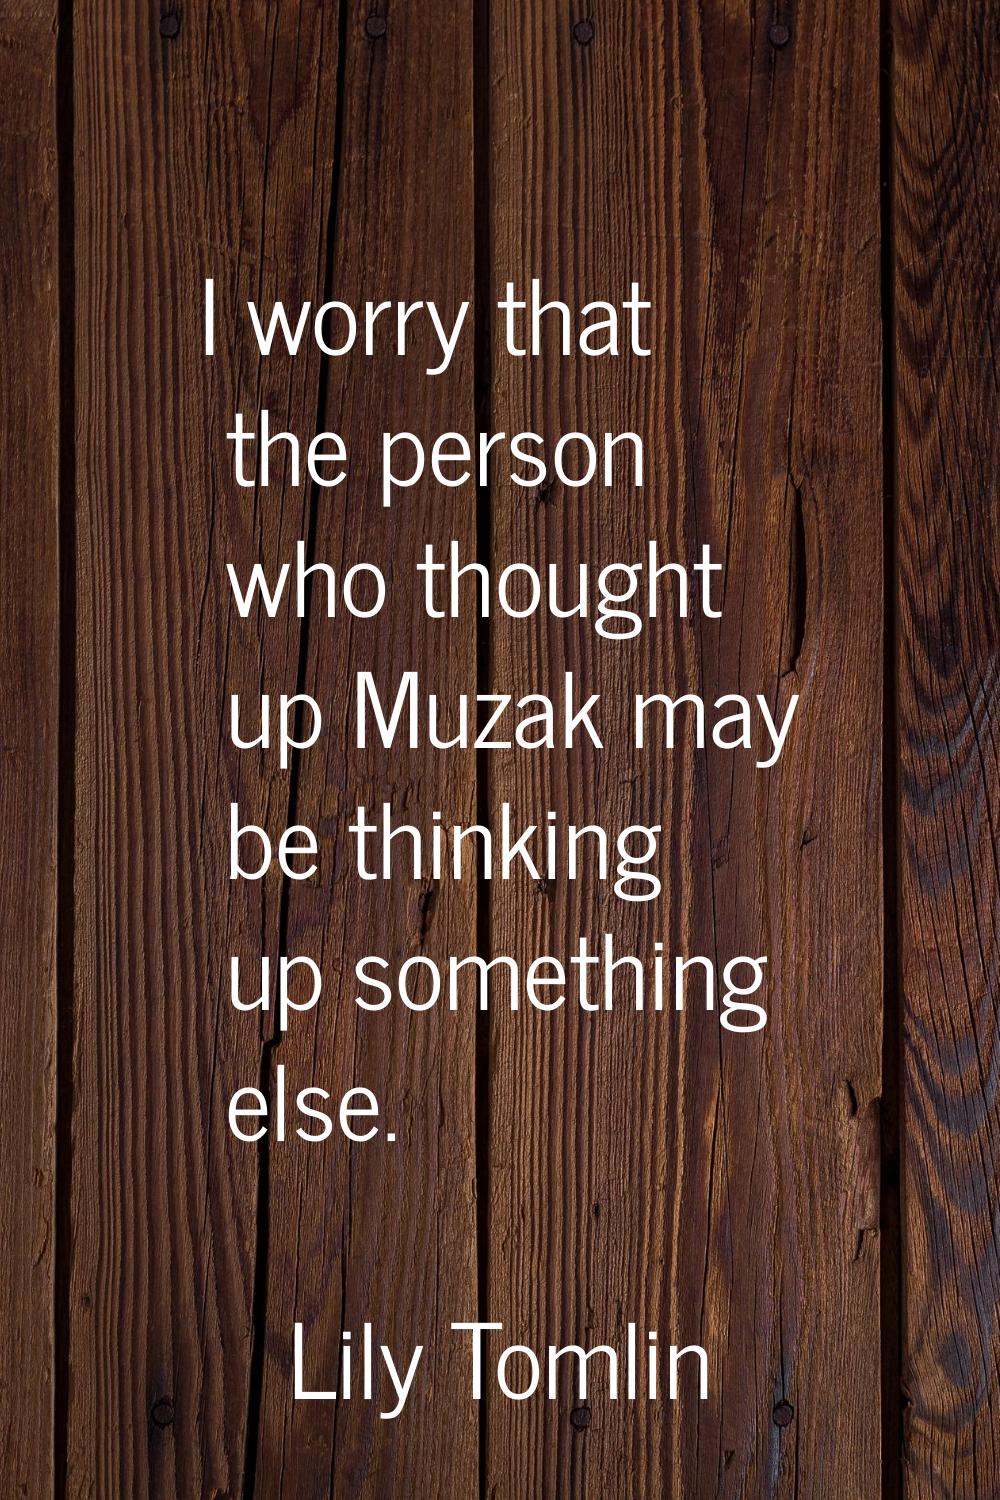 I worry that the person who thought up Muzak may be thinking up something else.